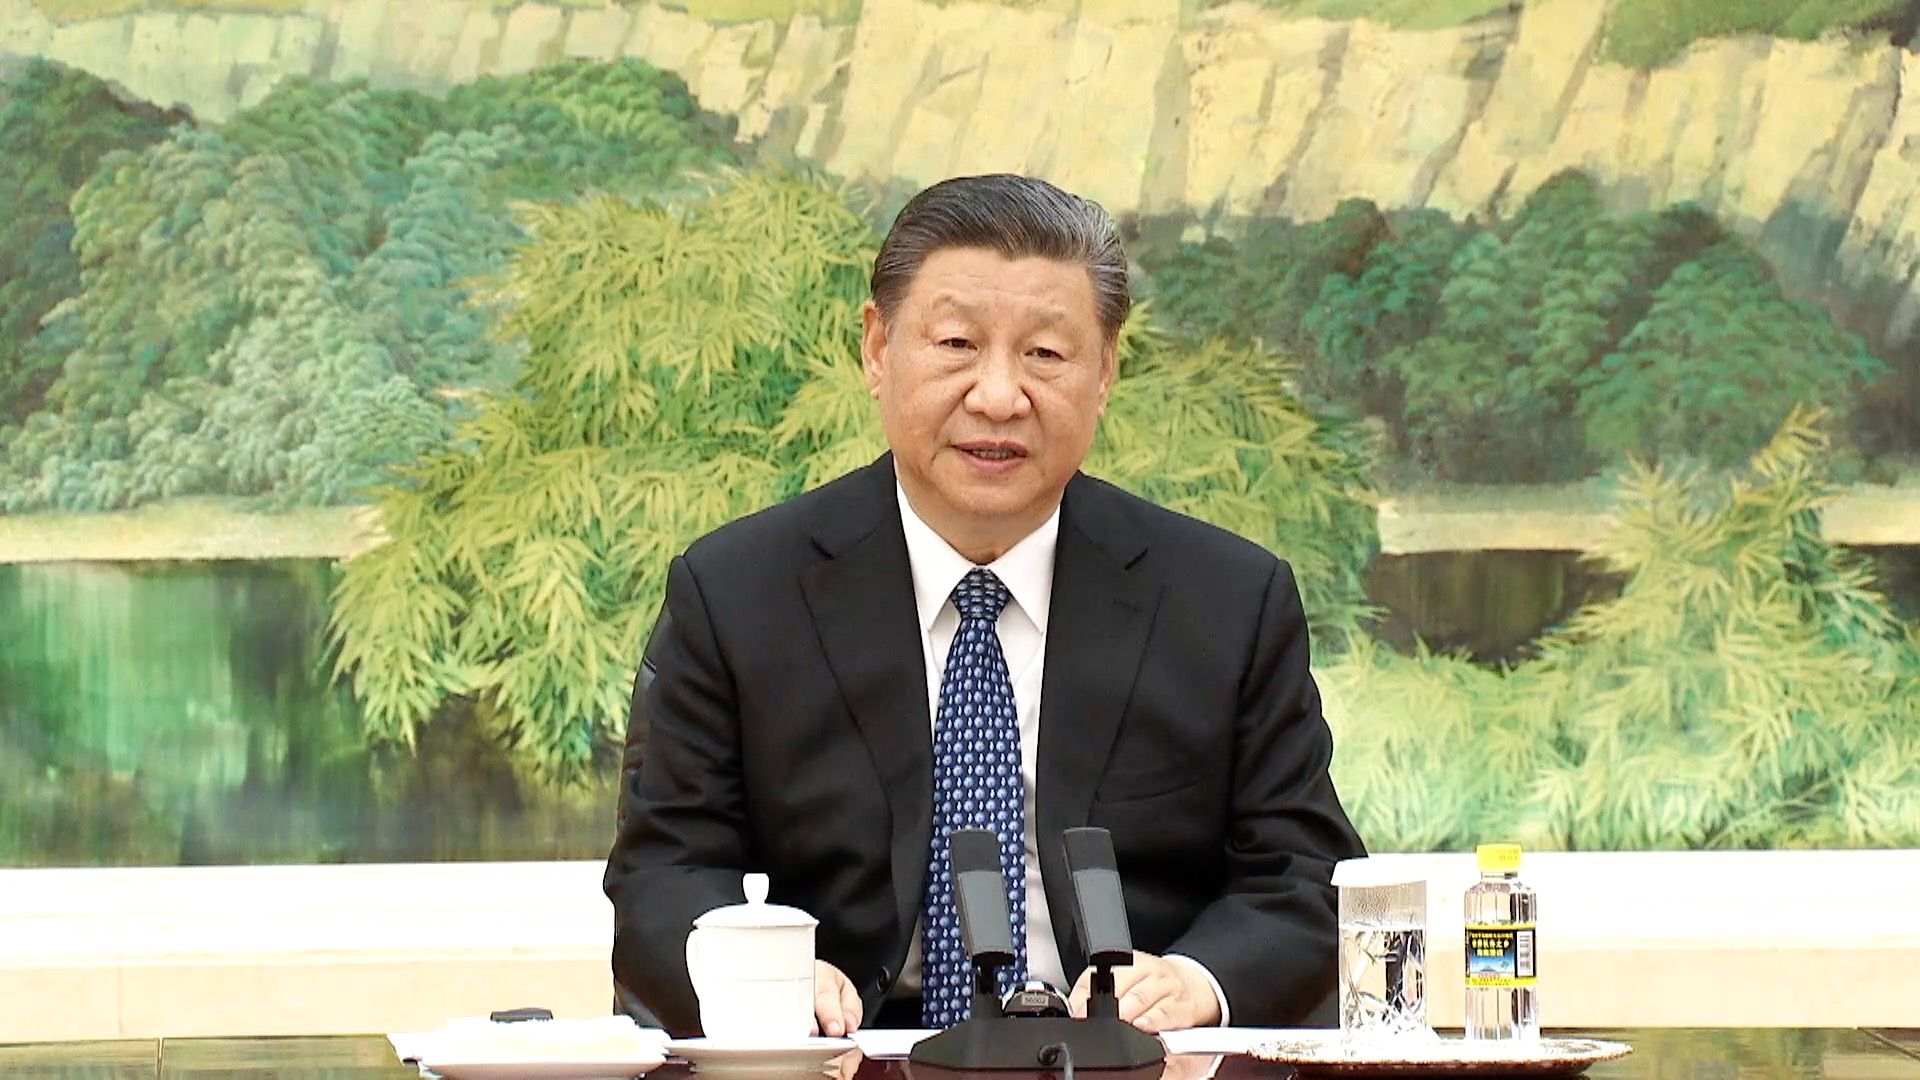 Xi Jinping meets with Blinken: I hope you will find it productive